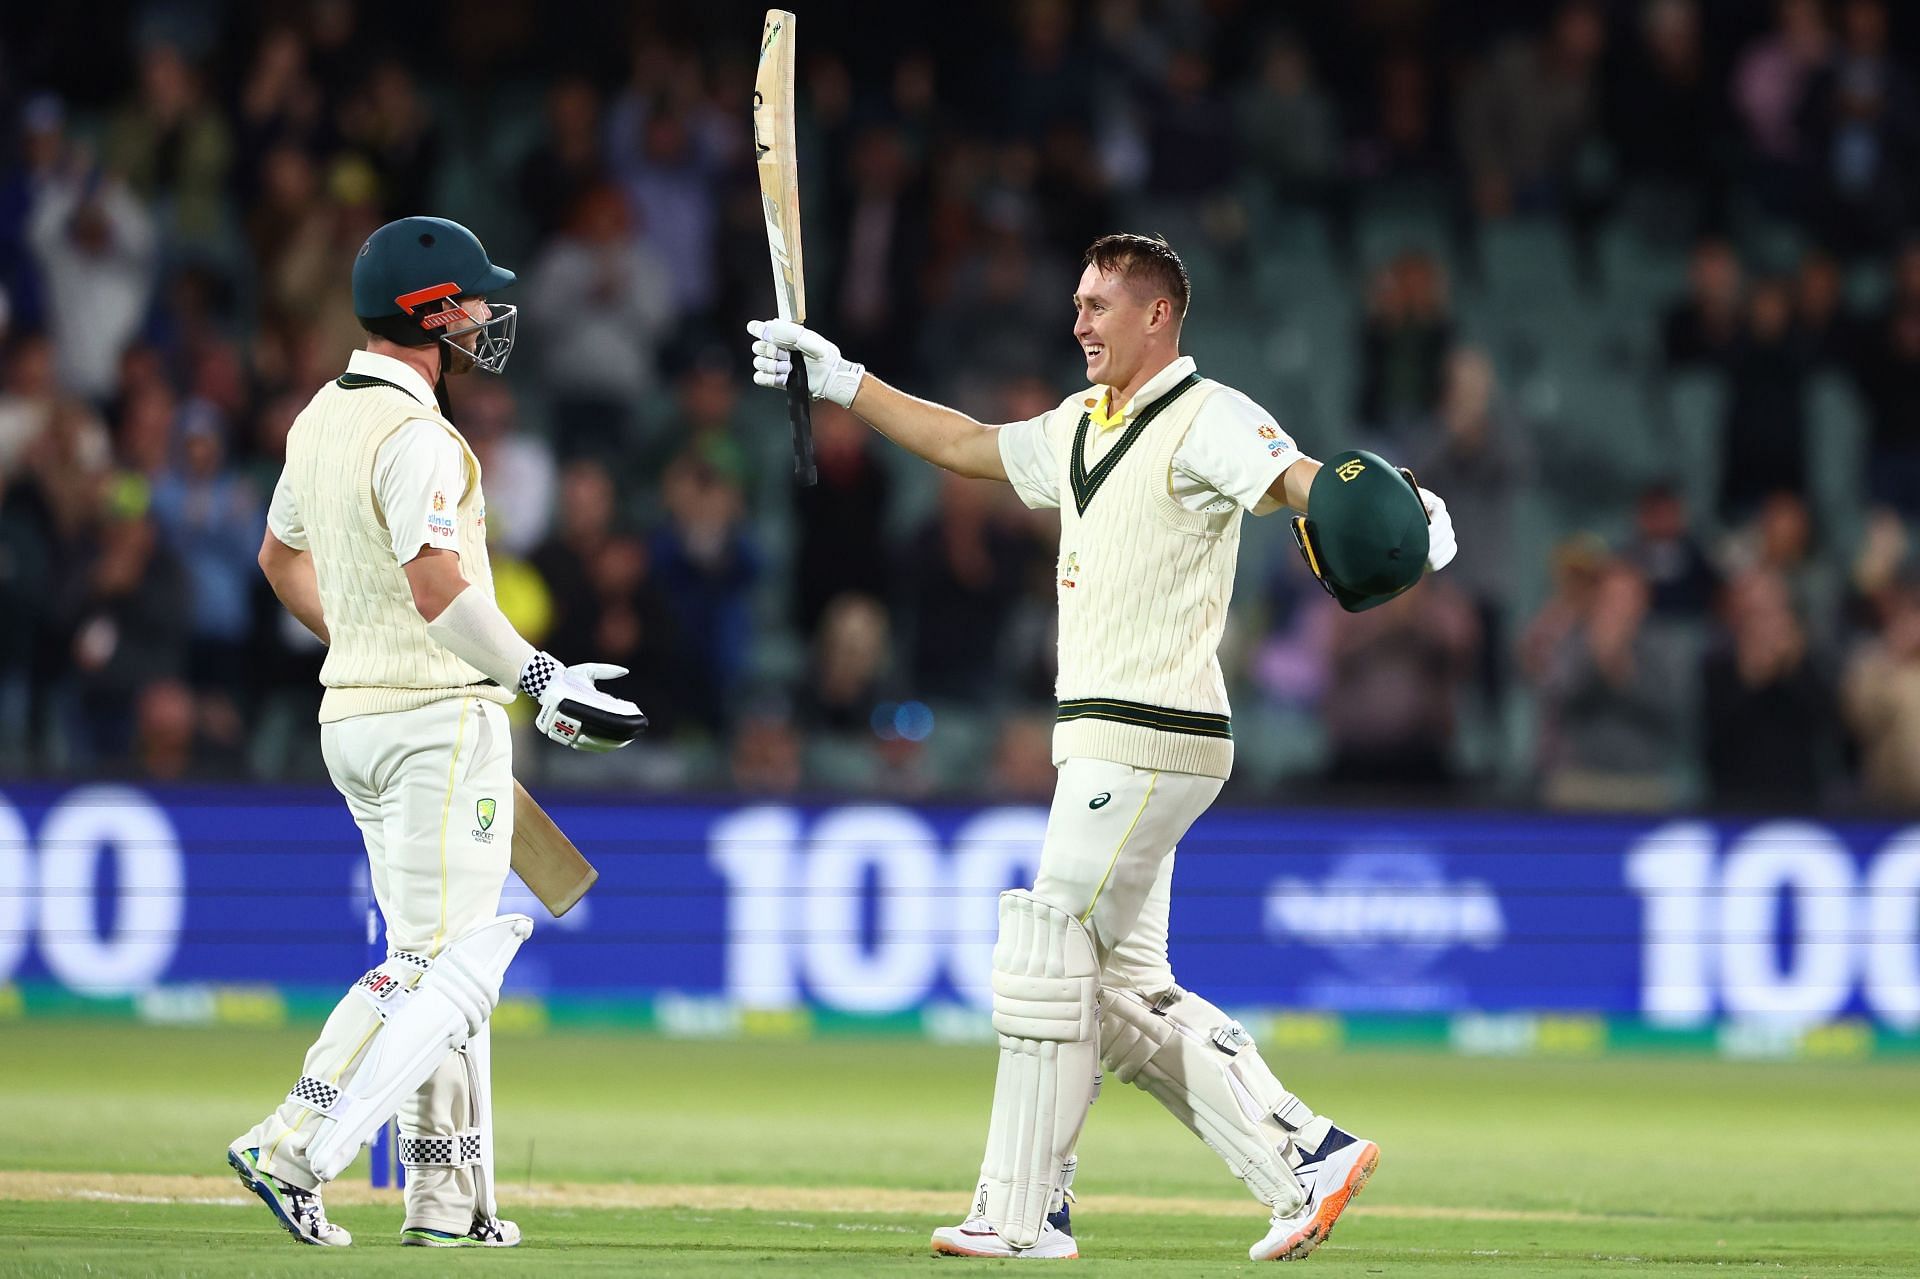 Marnus Labuschagne celebrates his century against West Indies at the Adelaide Oval. Pic: Getty Images